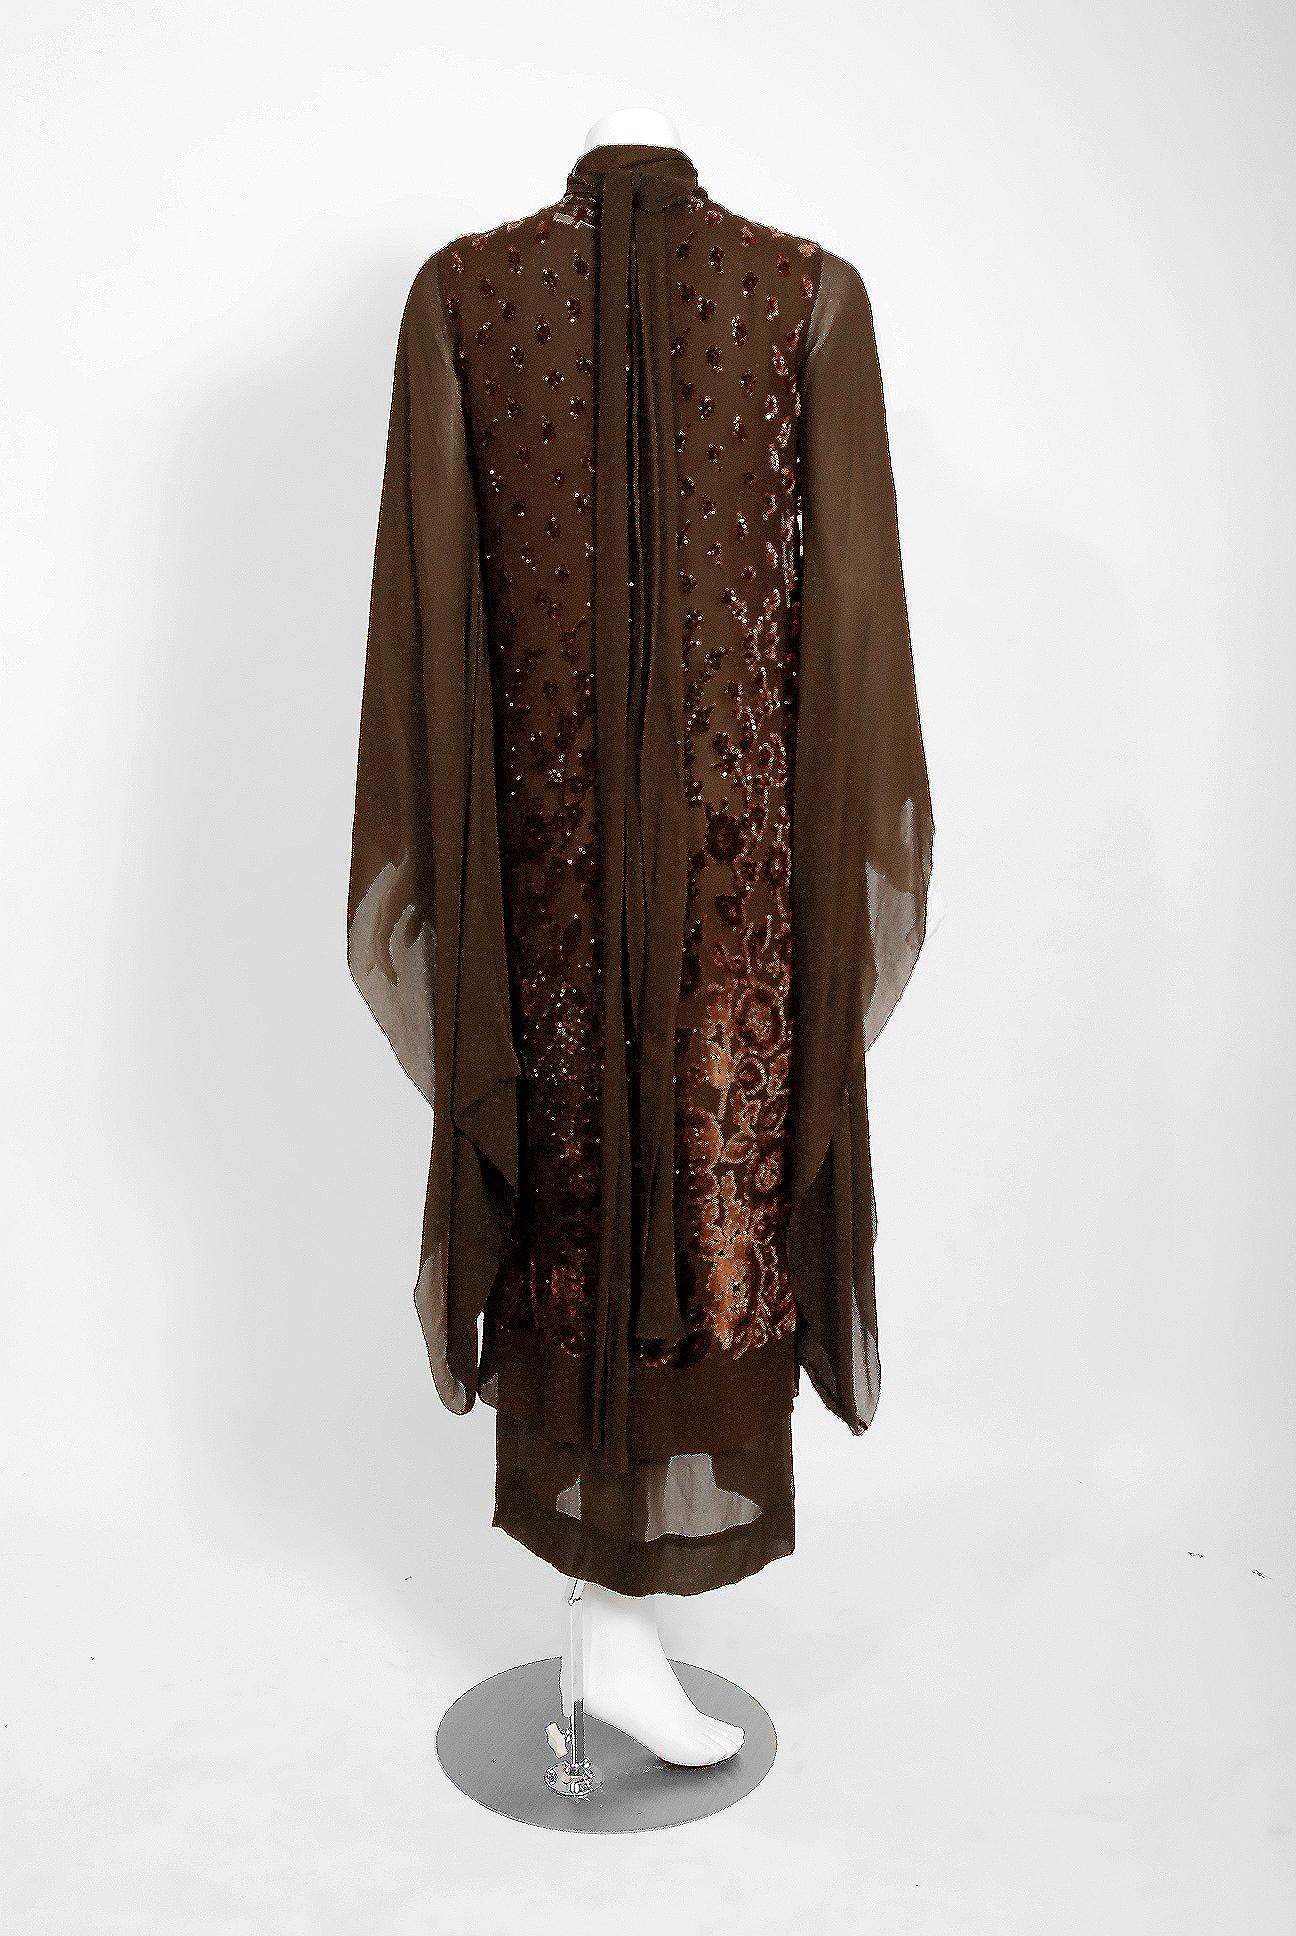 1969 Christian Dior Haute-Couture Brown Floral Flocked Silk Kimono Sleeve Gown 1